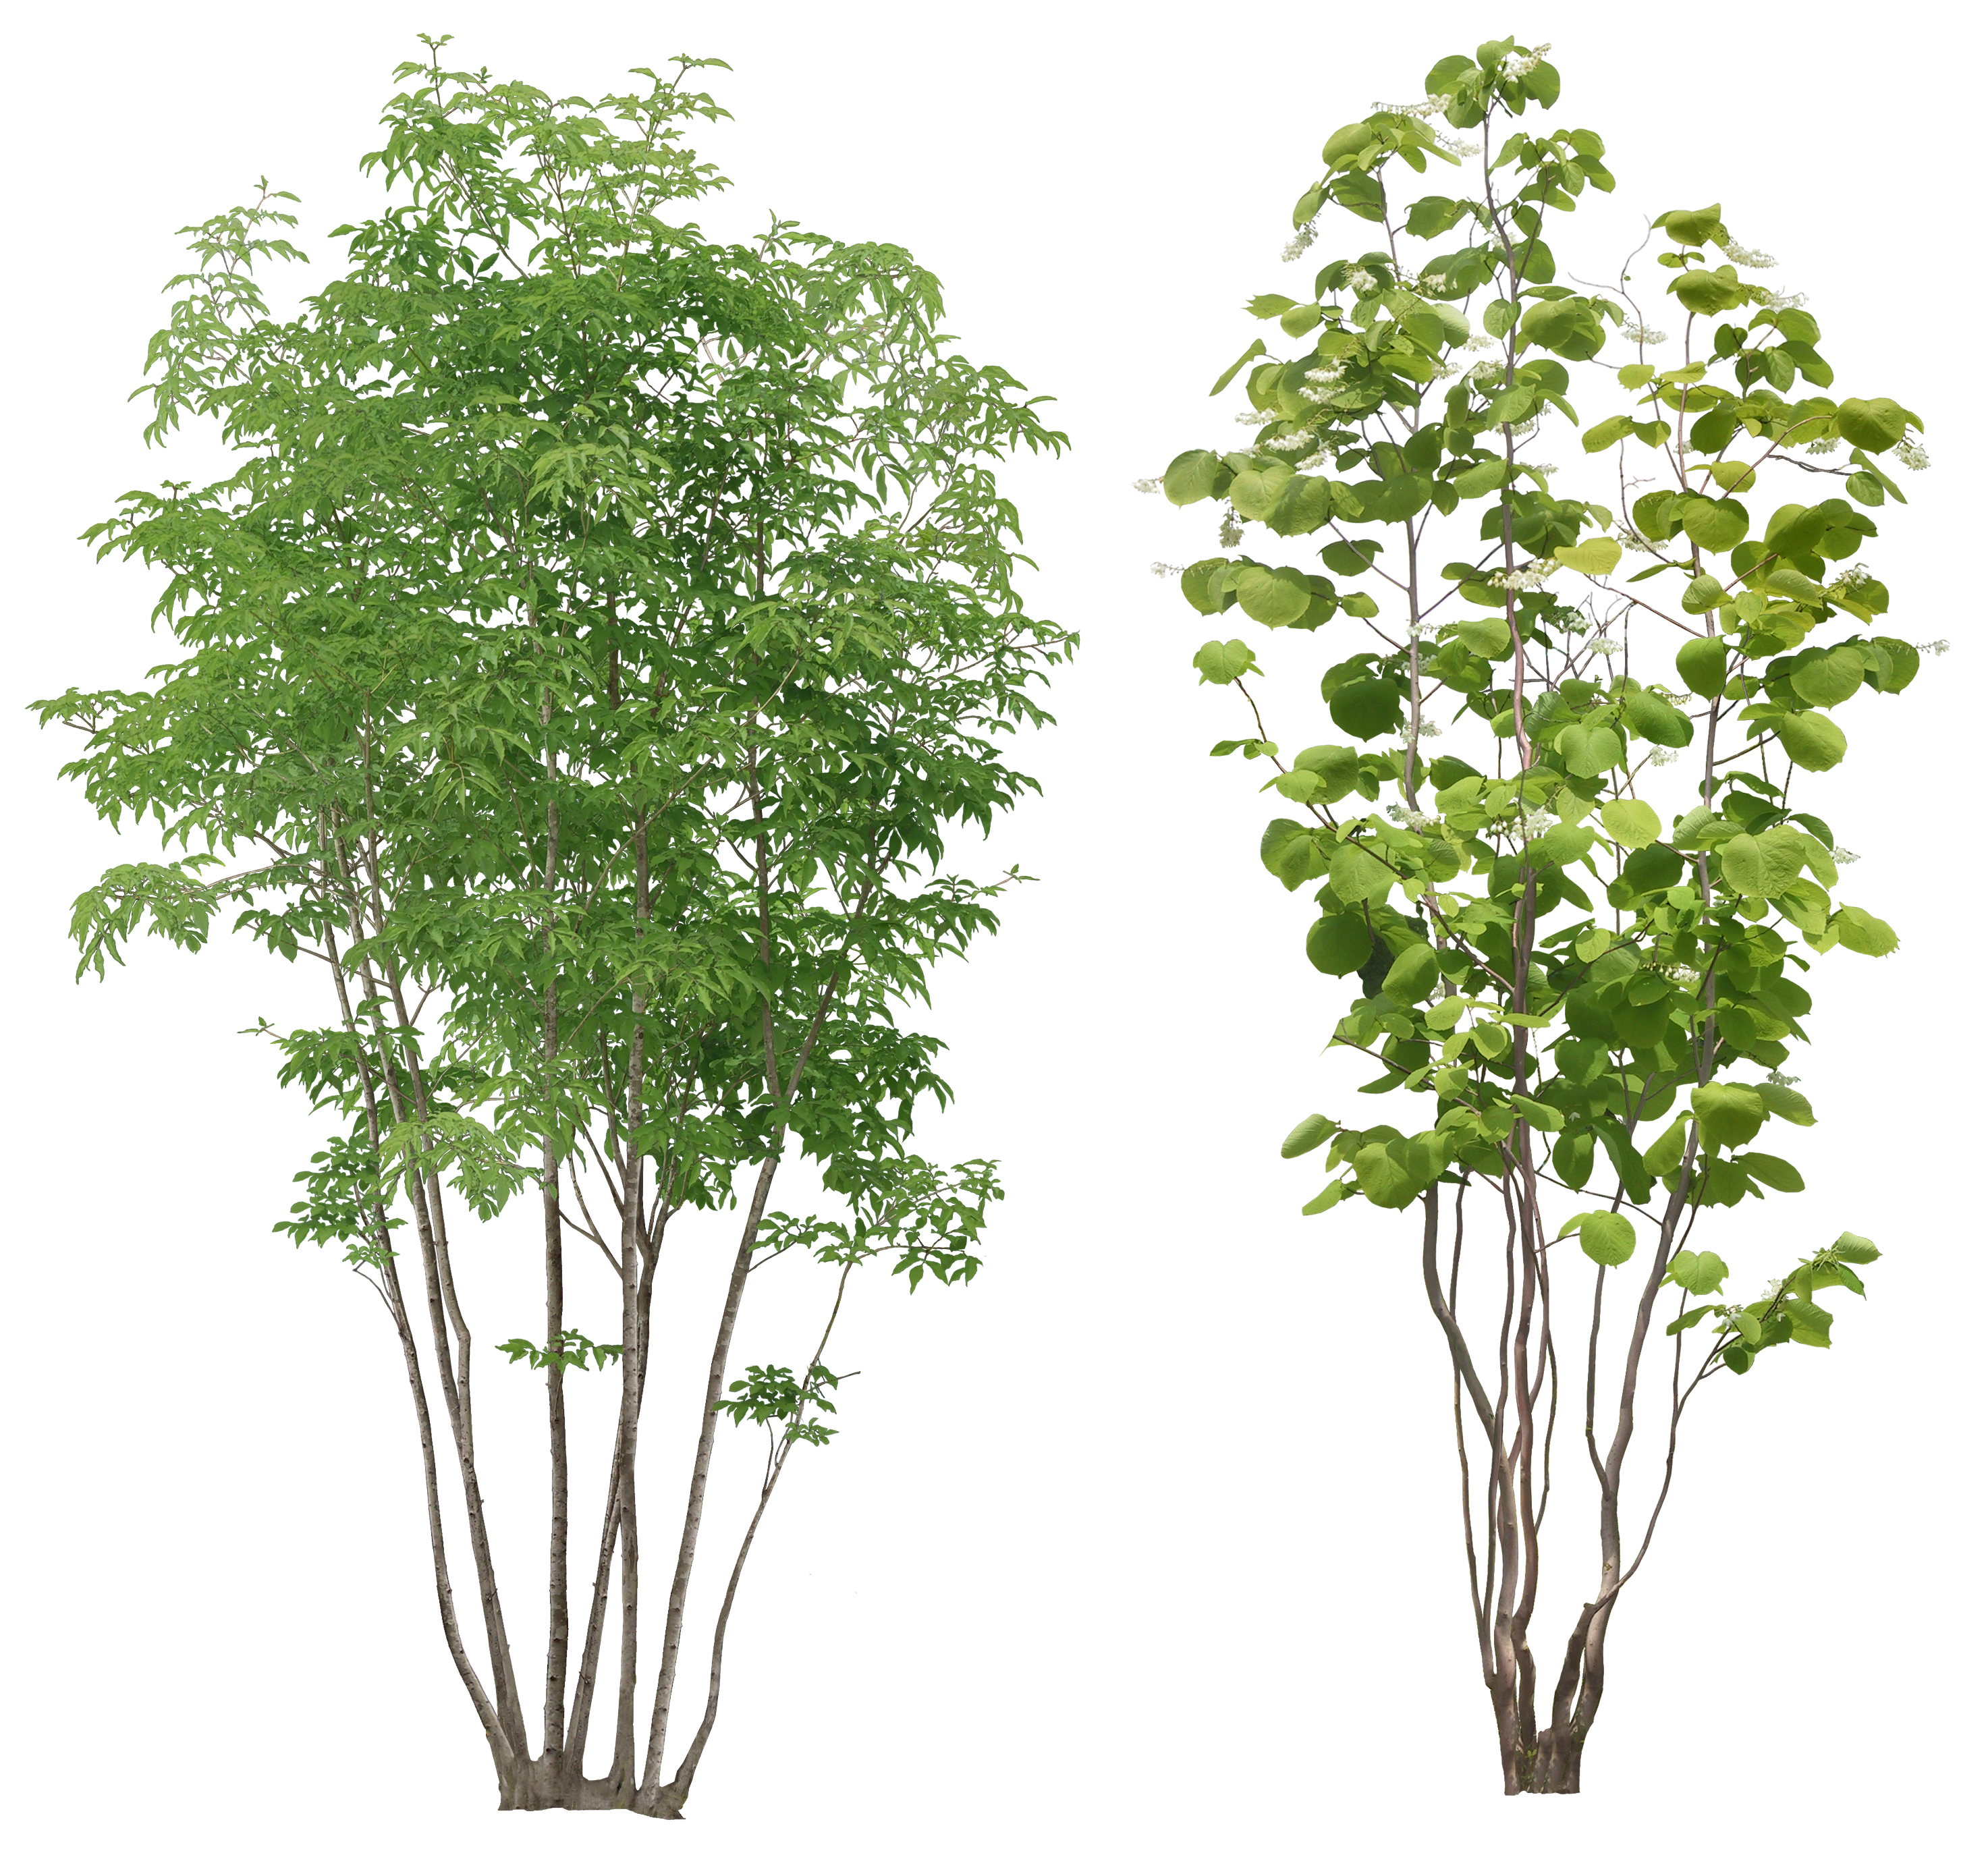 Large Green Tree PNG Picture